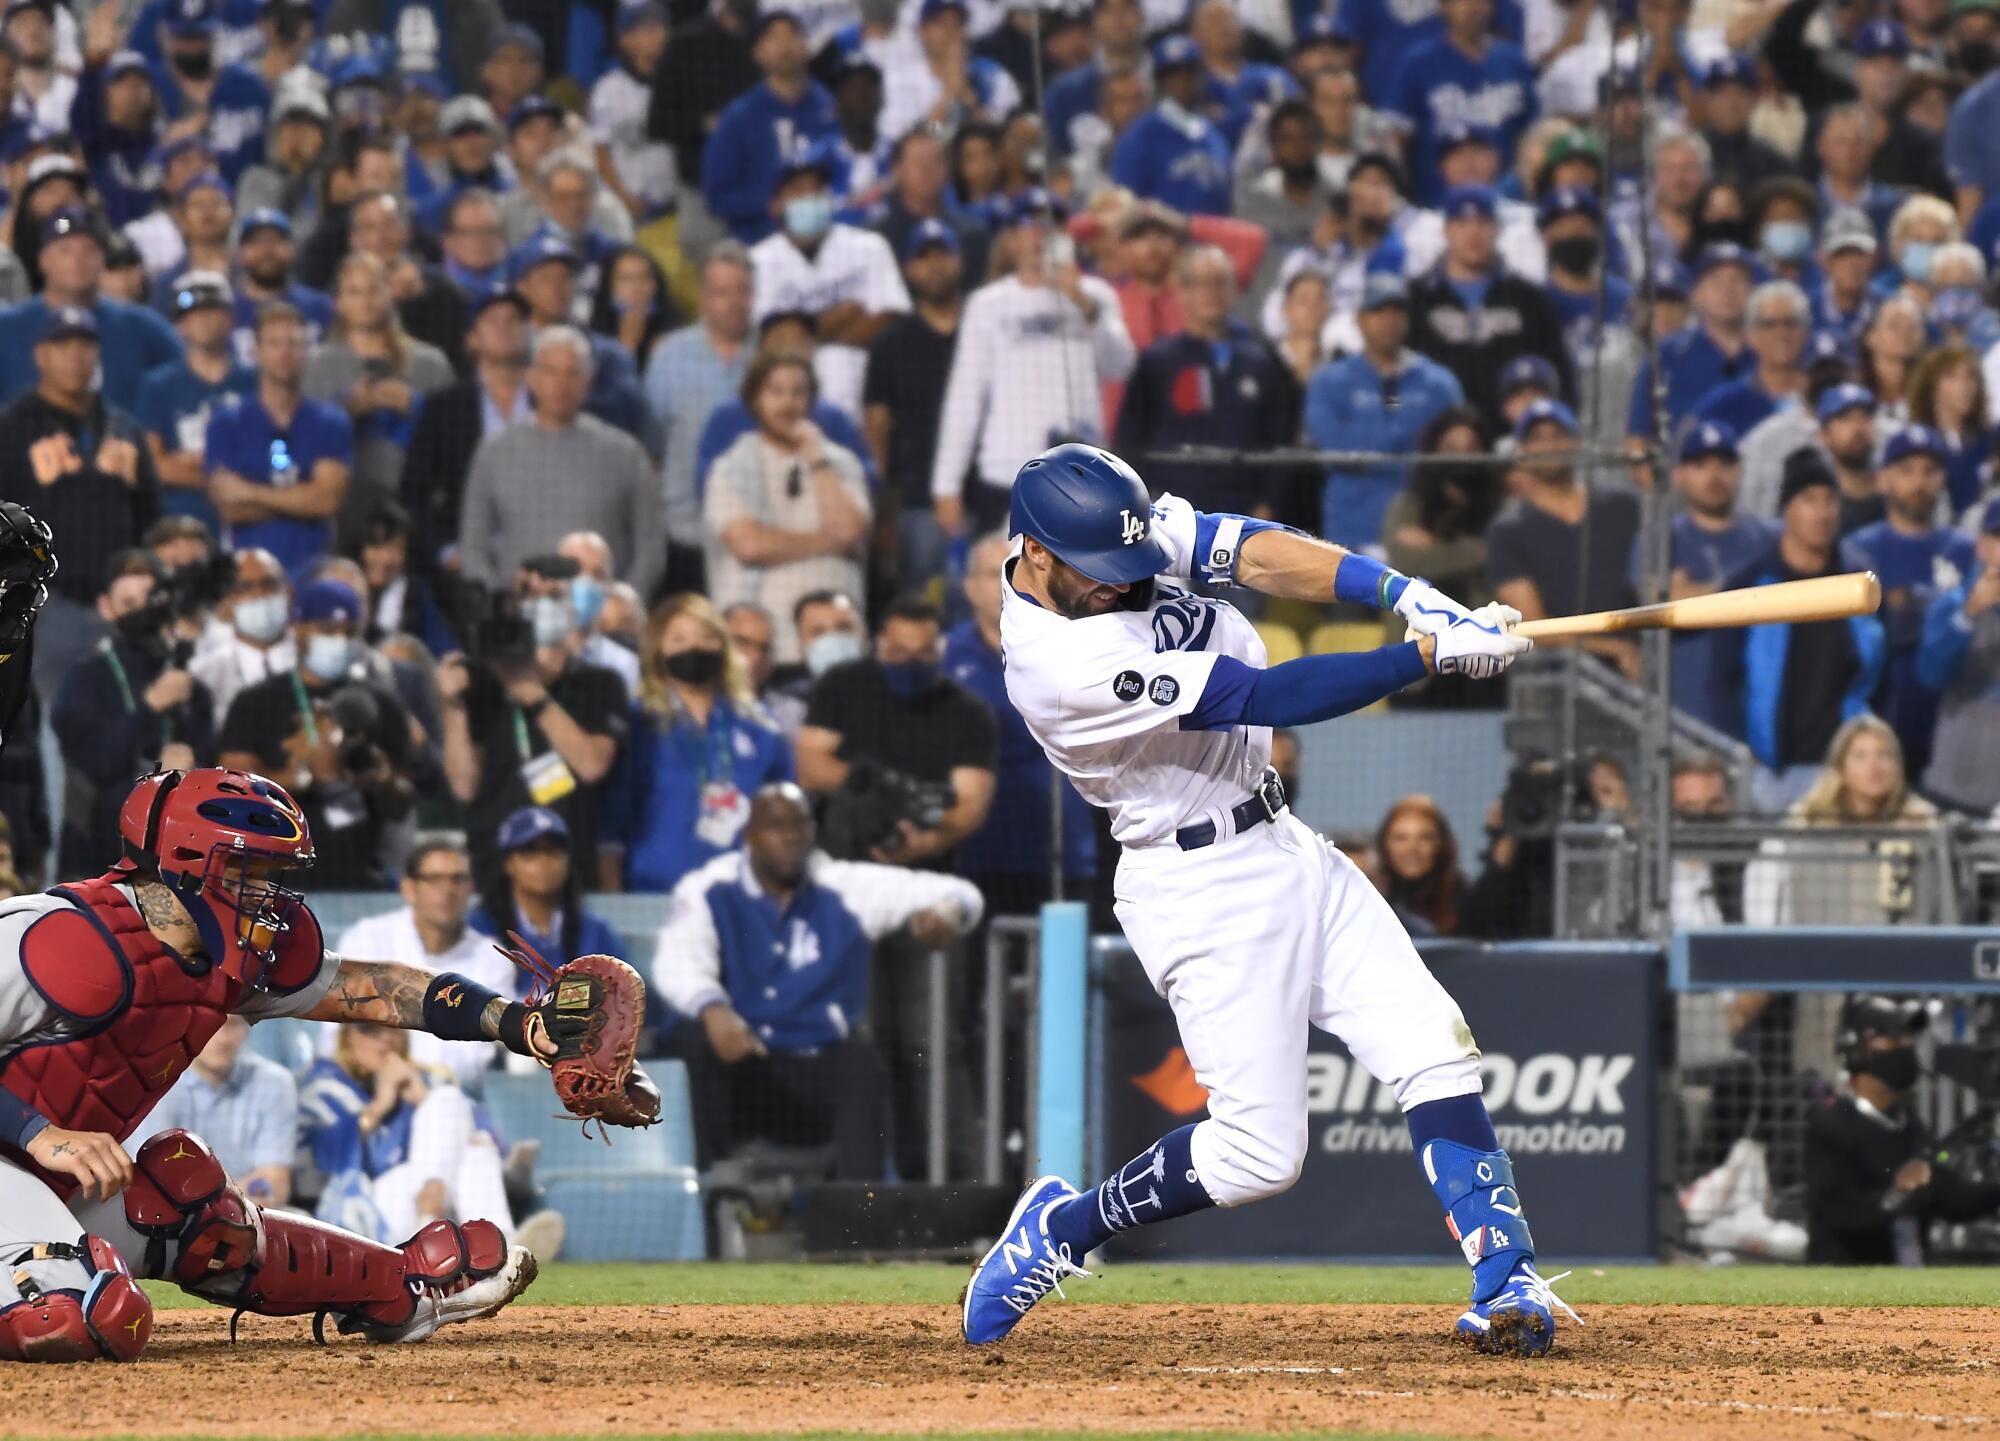 Chris Taylor hits the game-winning two-run home run during the ninth inning against the St. Louis Cardinals.